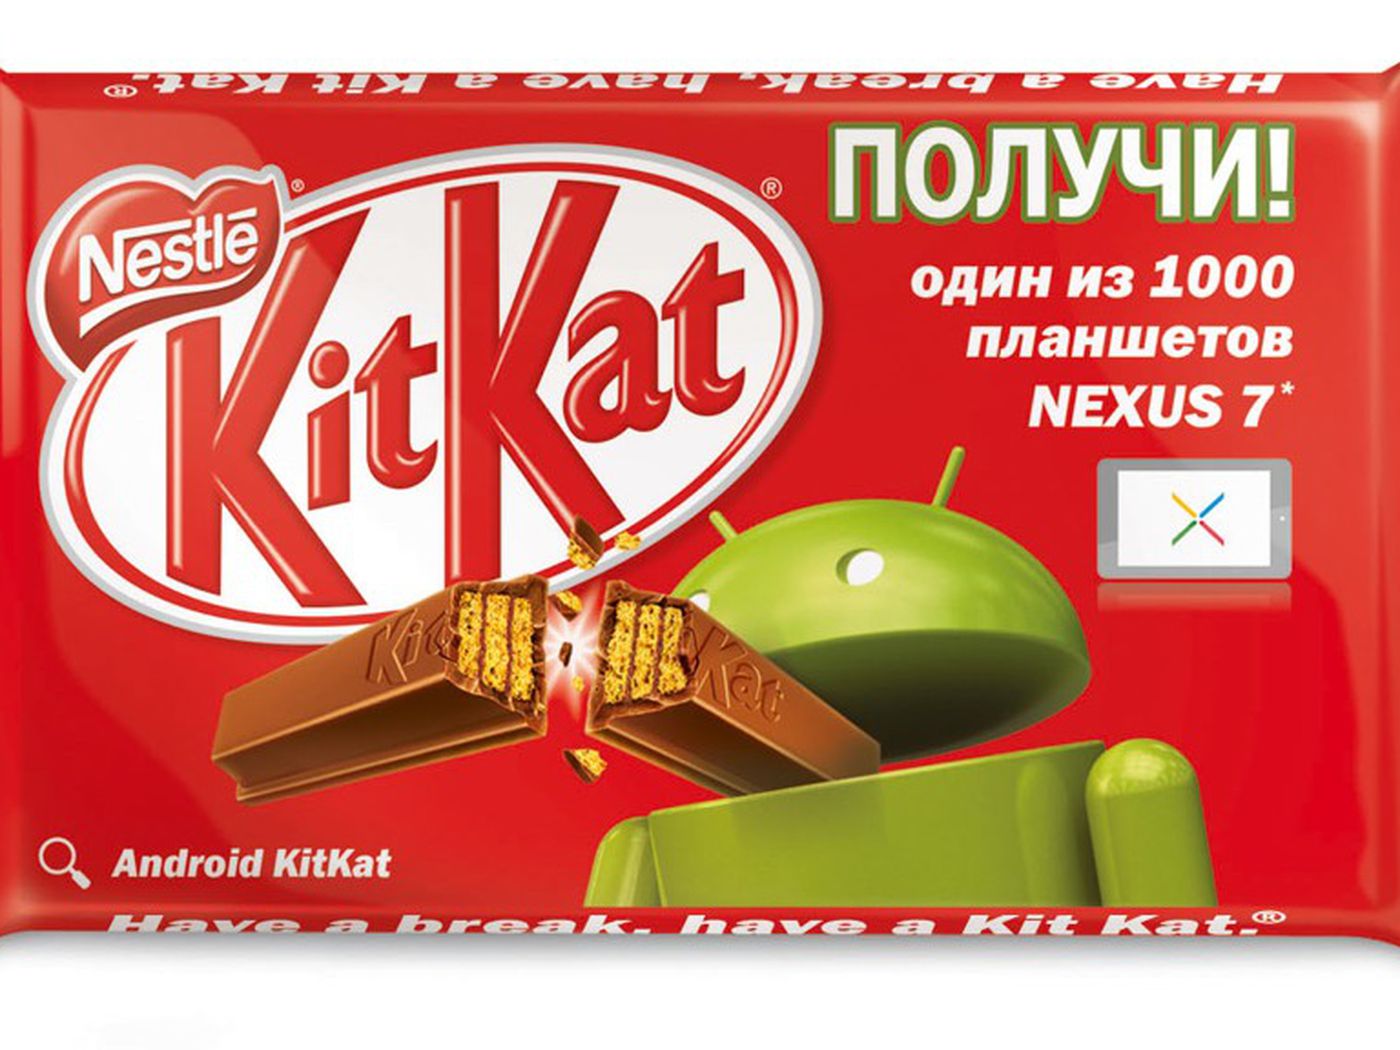 Android KitKat: the story behind a delicious partnership